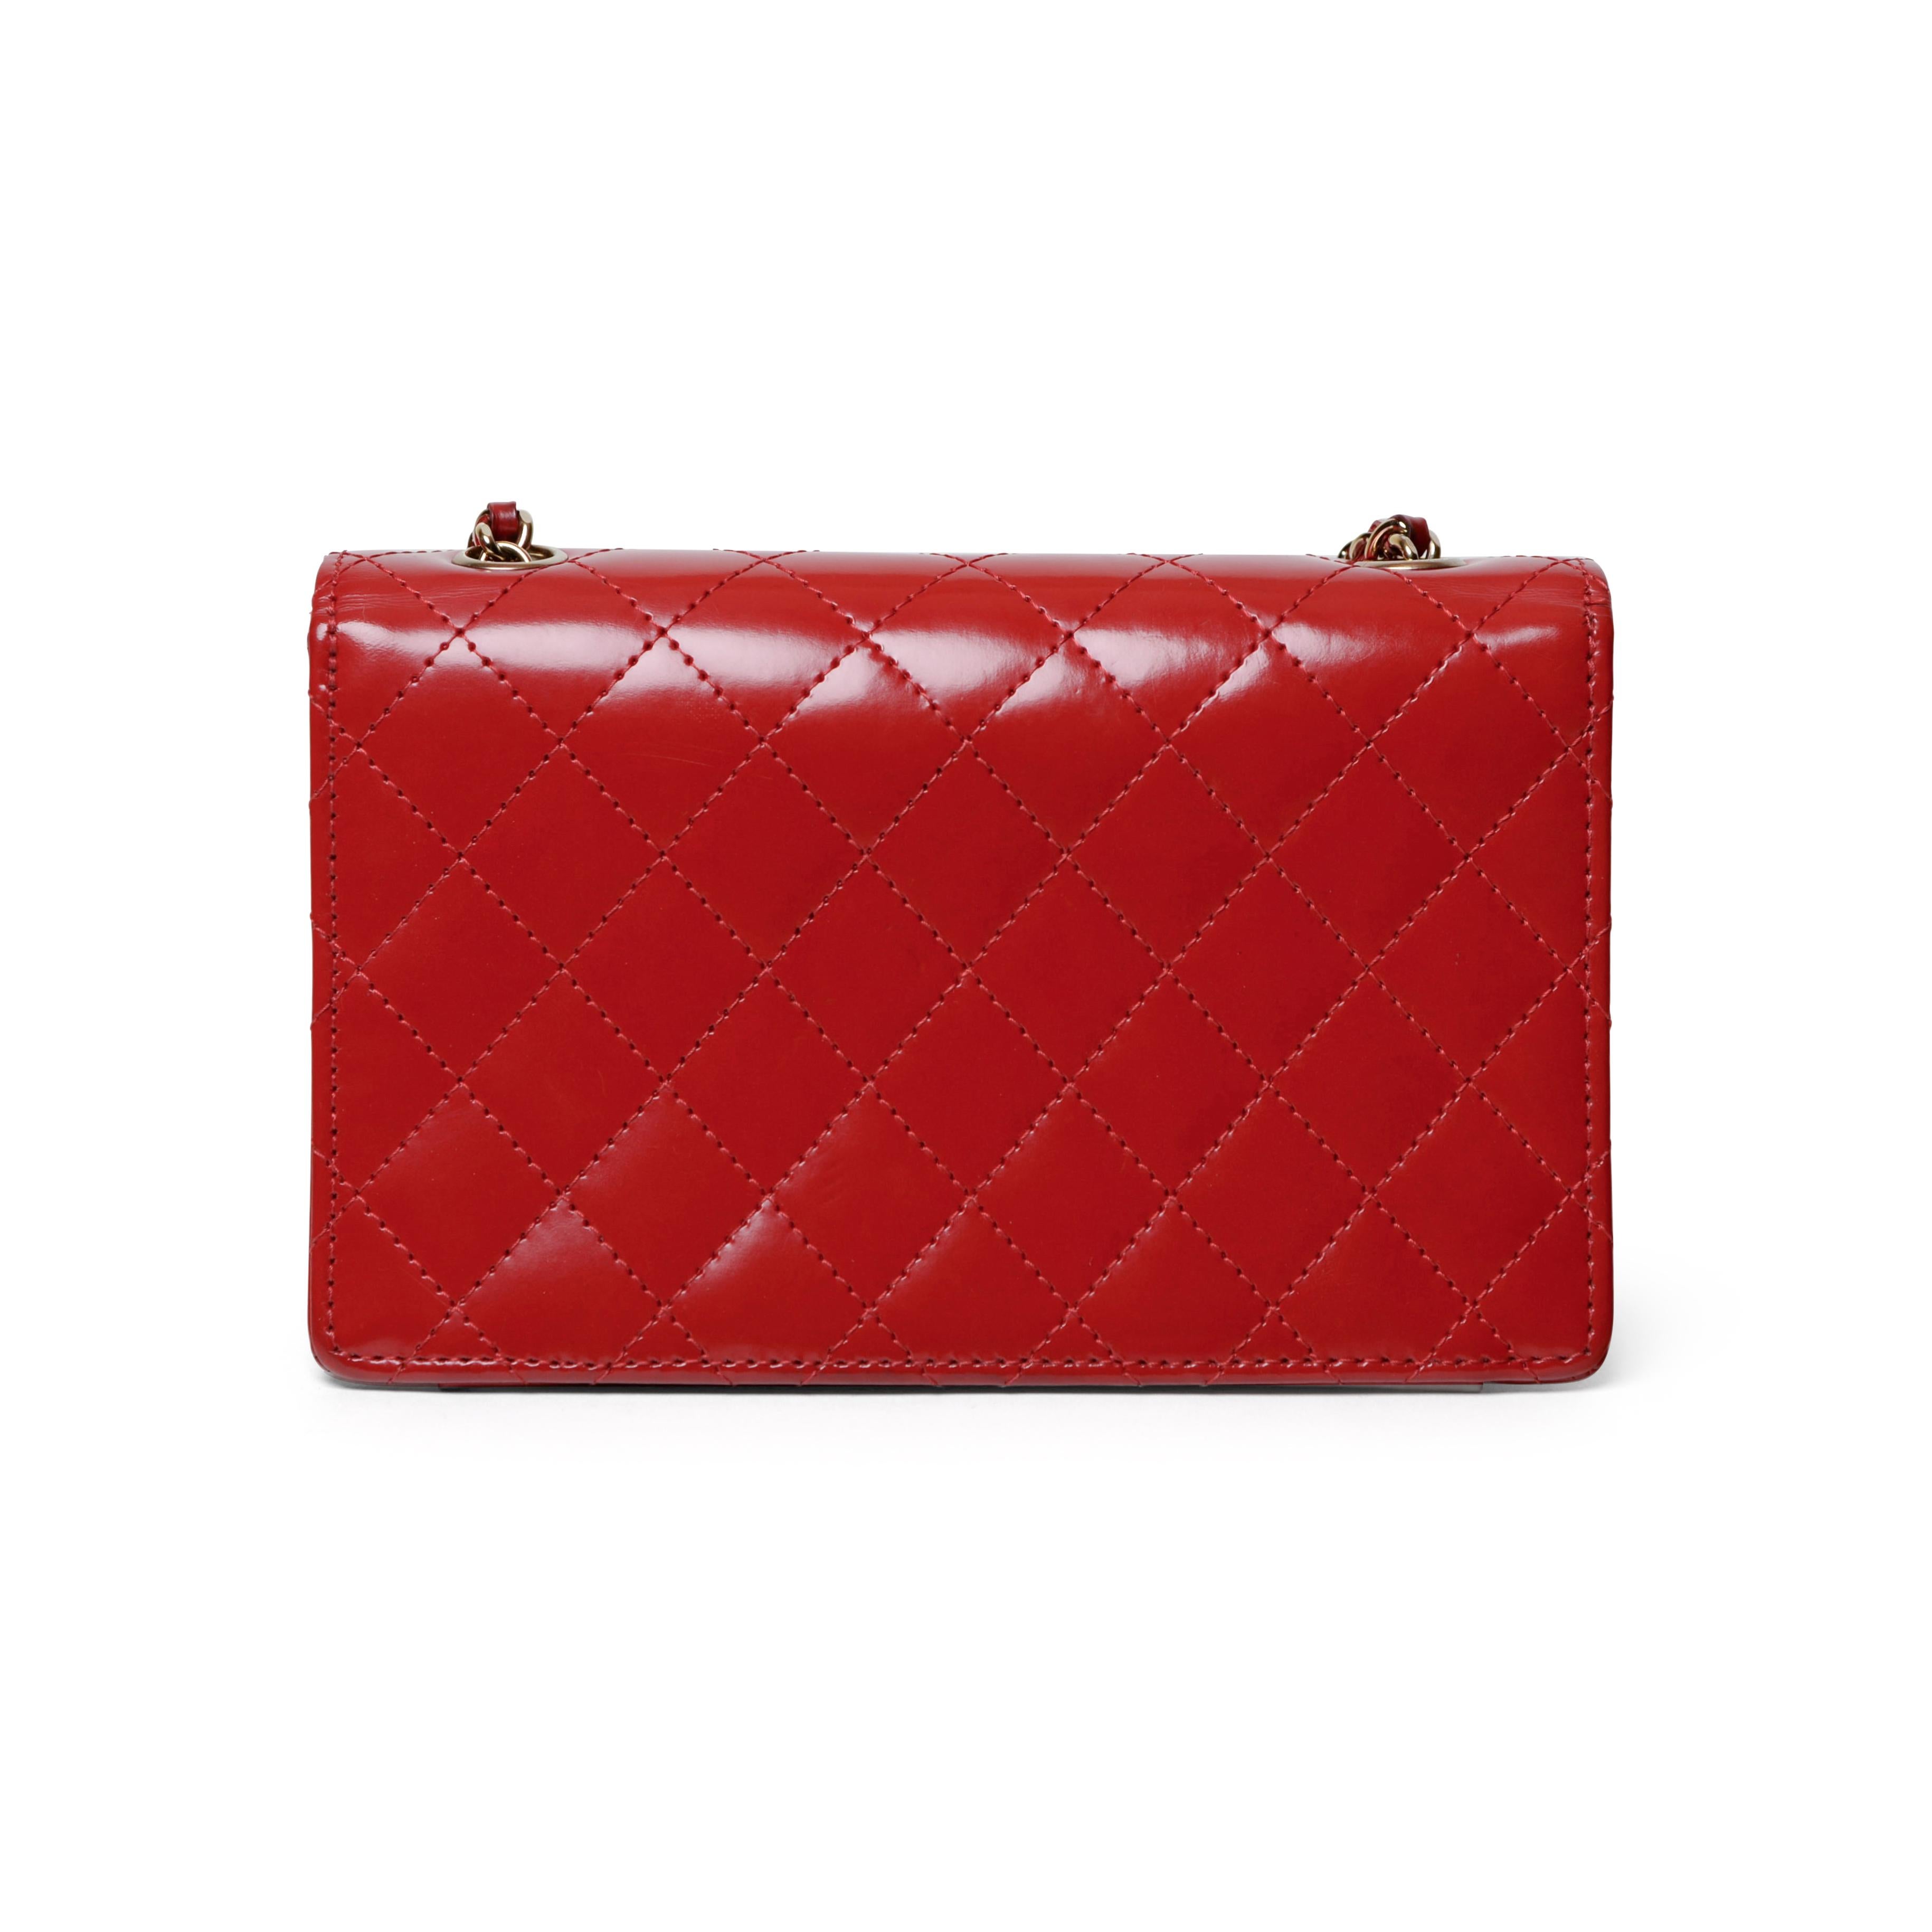 Chanel Classic Red Mini Flap Bag Patent Leather For Sale 2